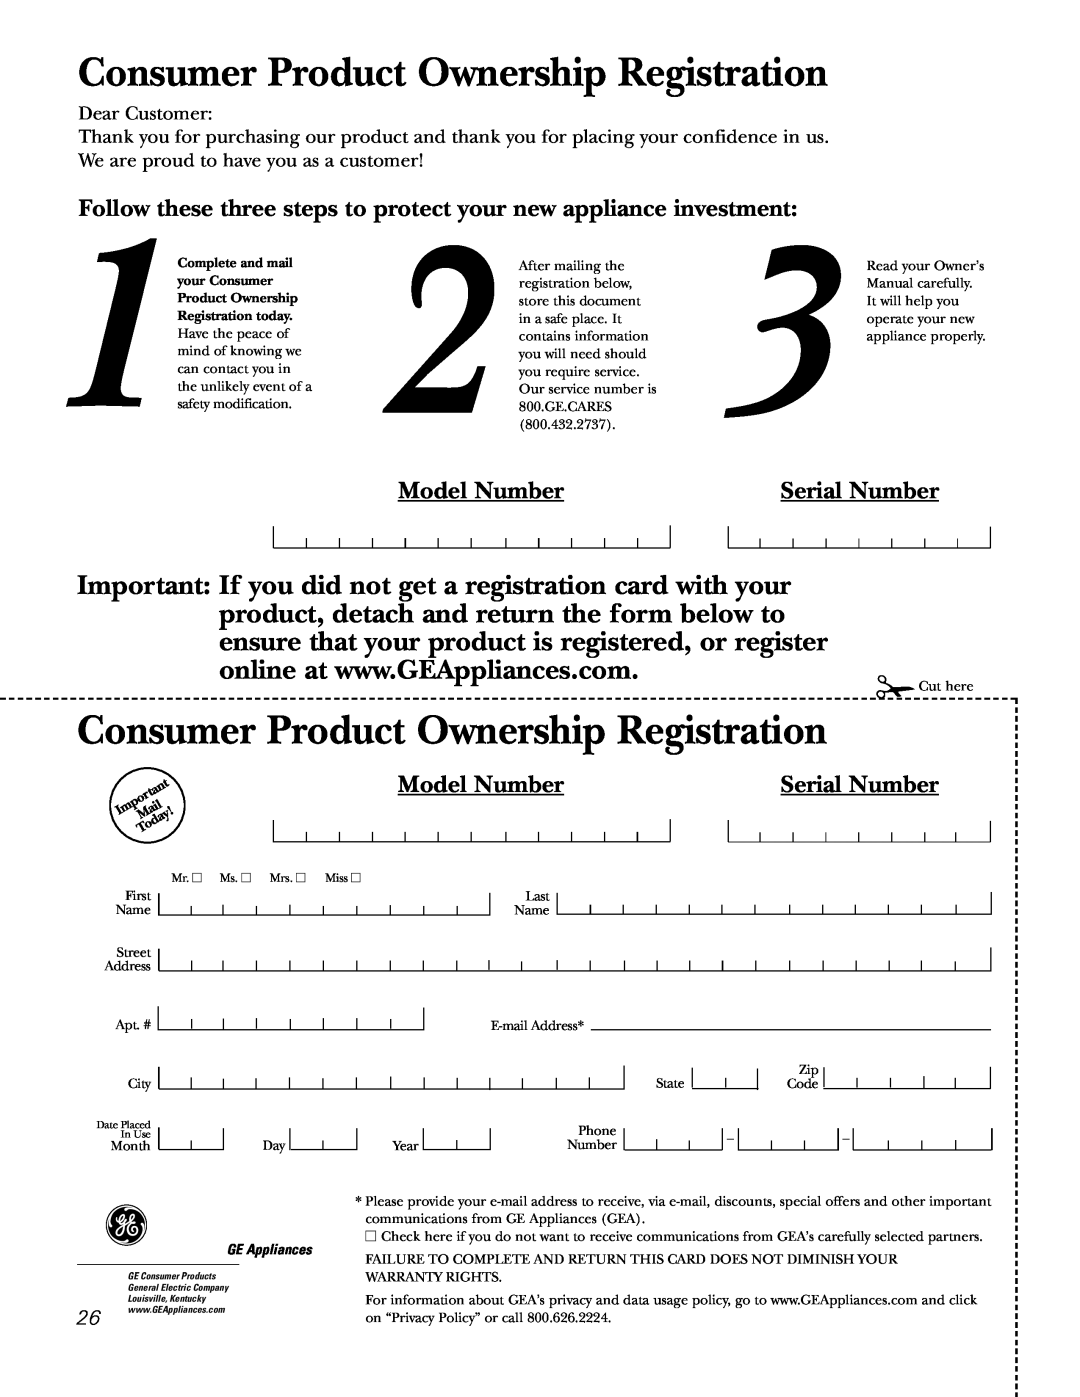 GE JRP20 Model Number, Serial Number, Consumer Product Ownership Registration, Complete and mail, your Consumer 